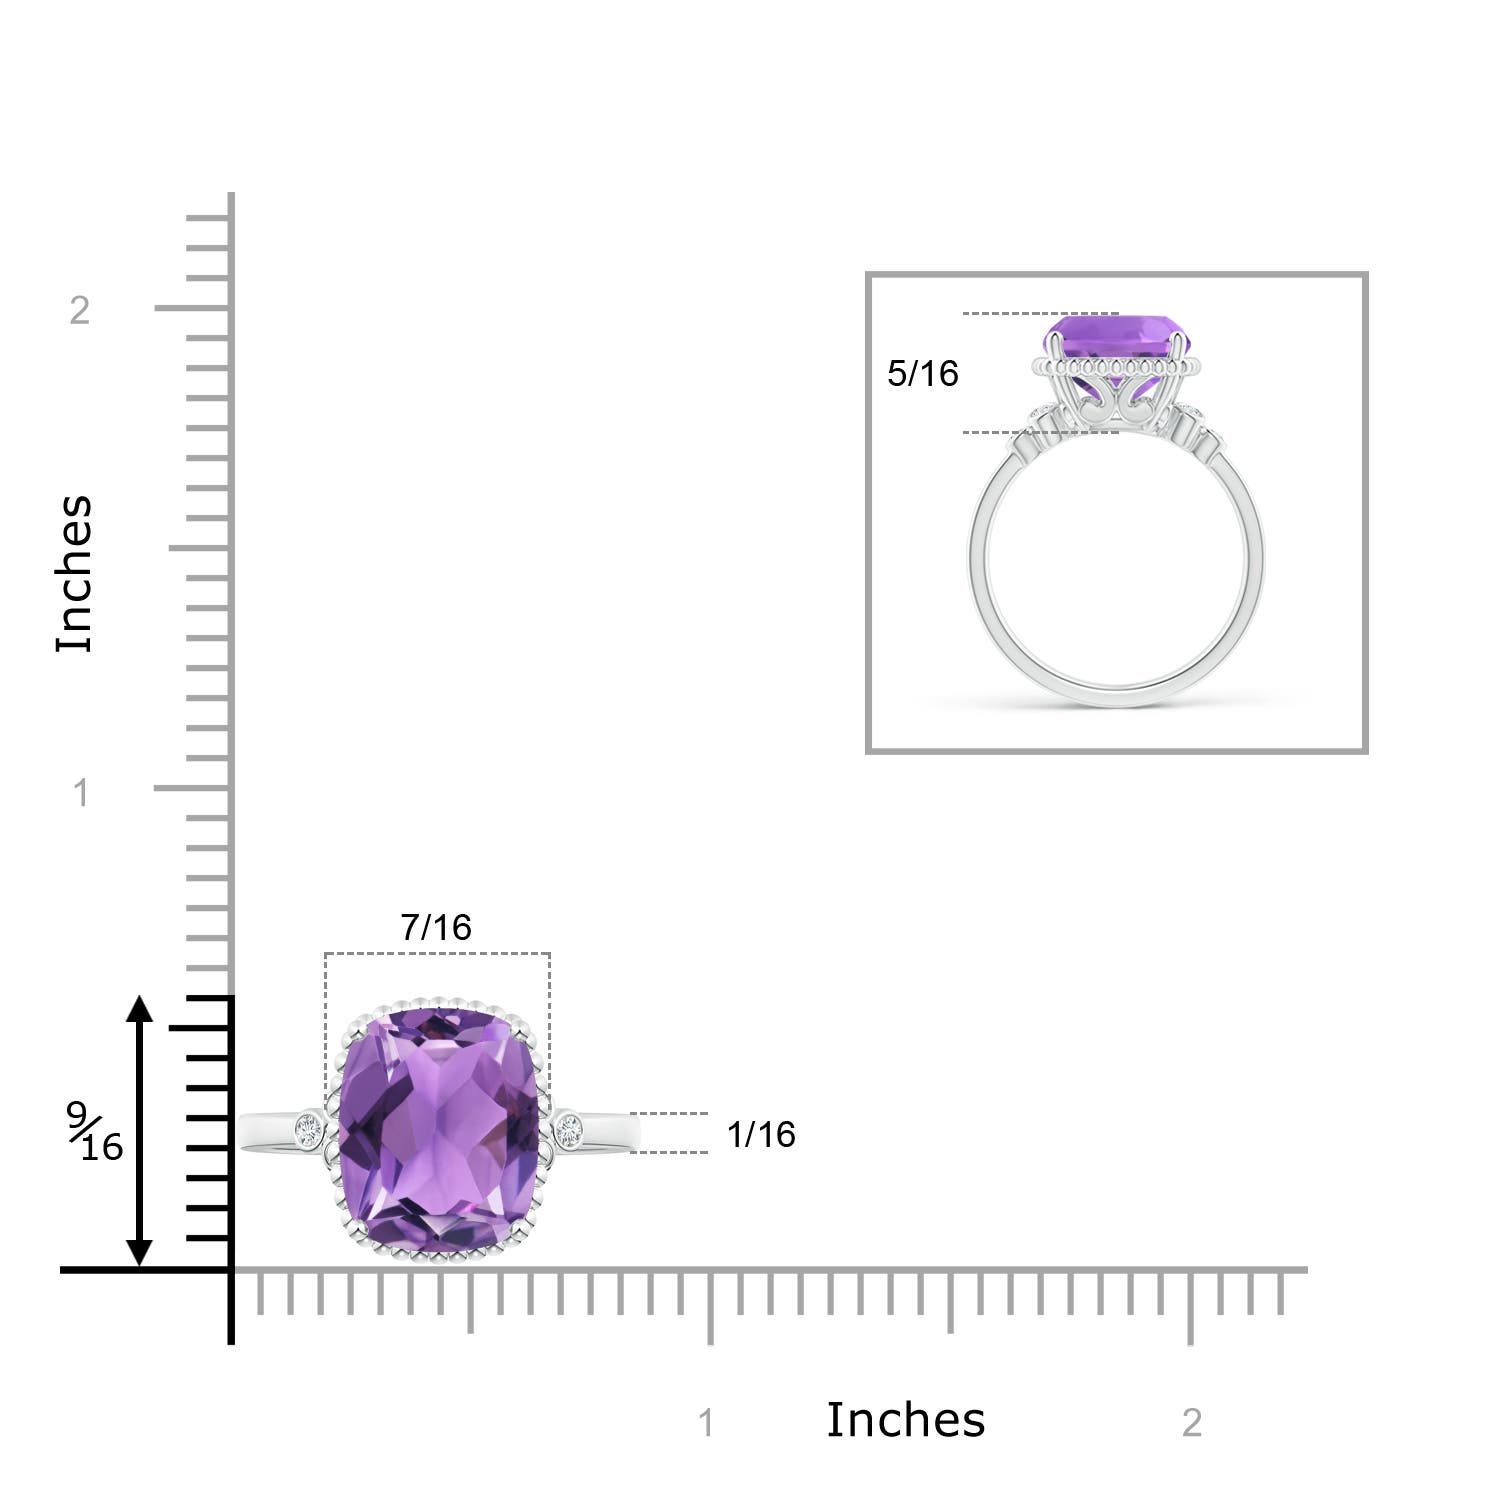 AA - Amethyst / 4.71 CT / 14 KT White Gold